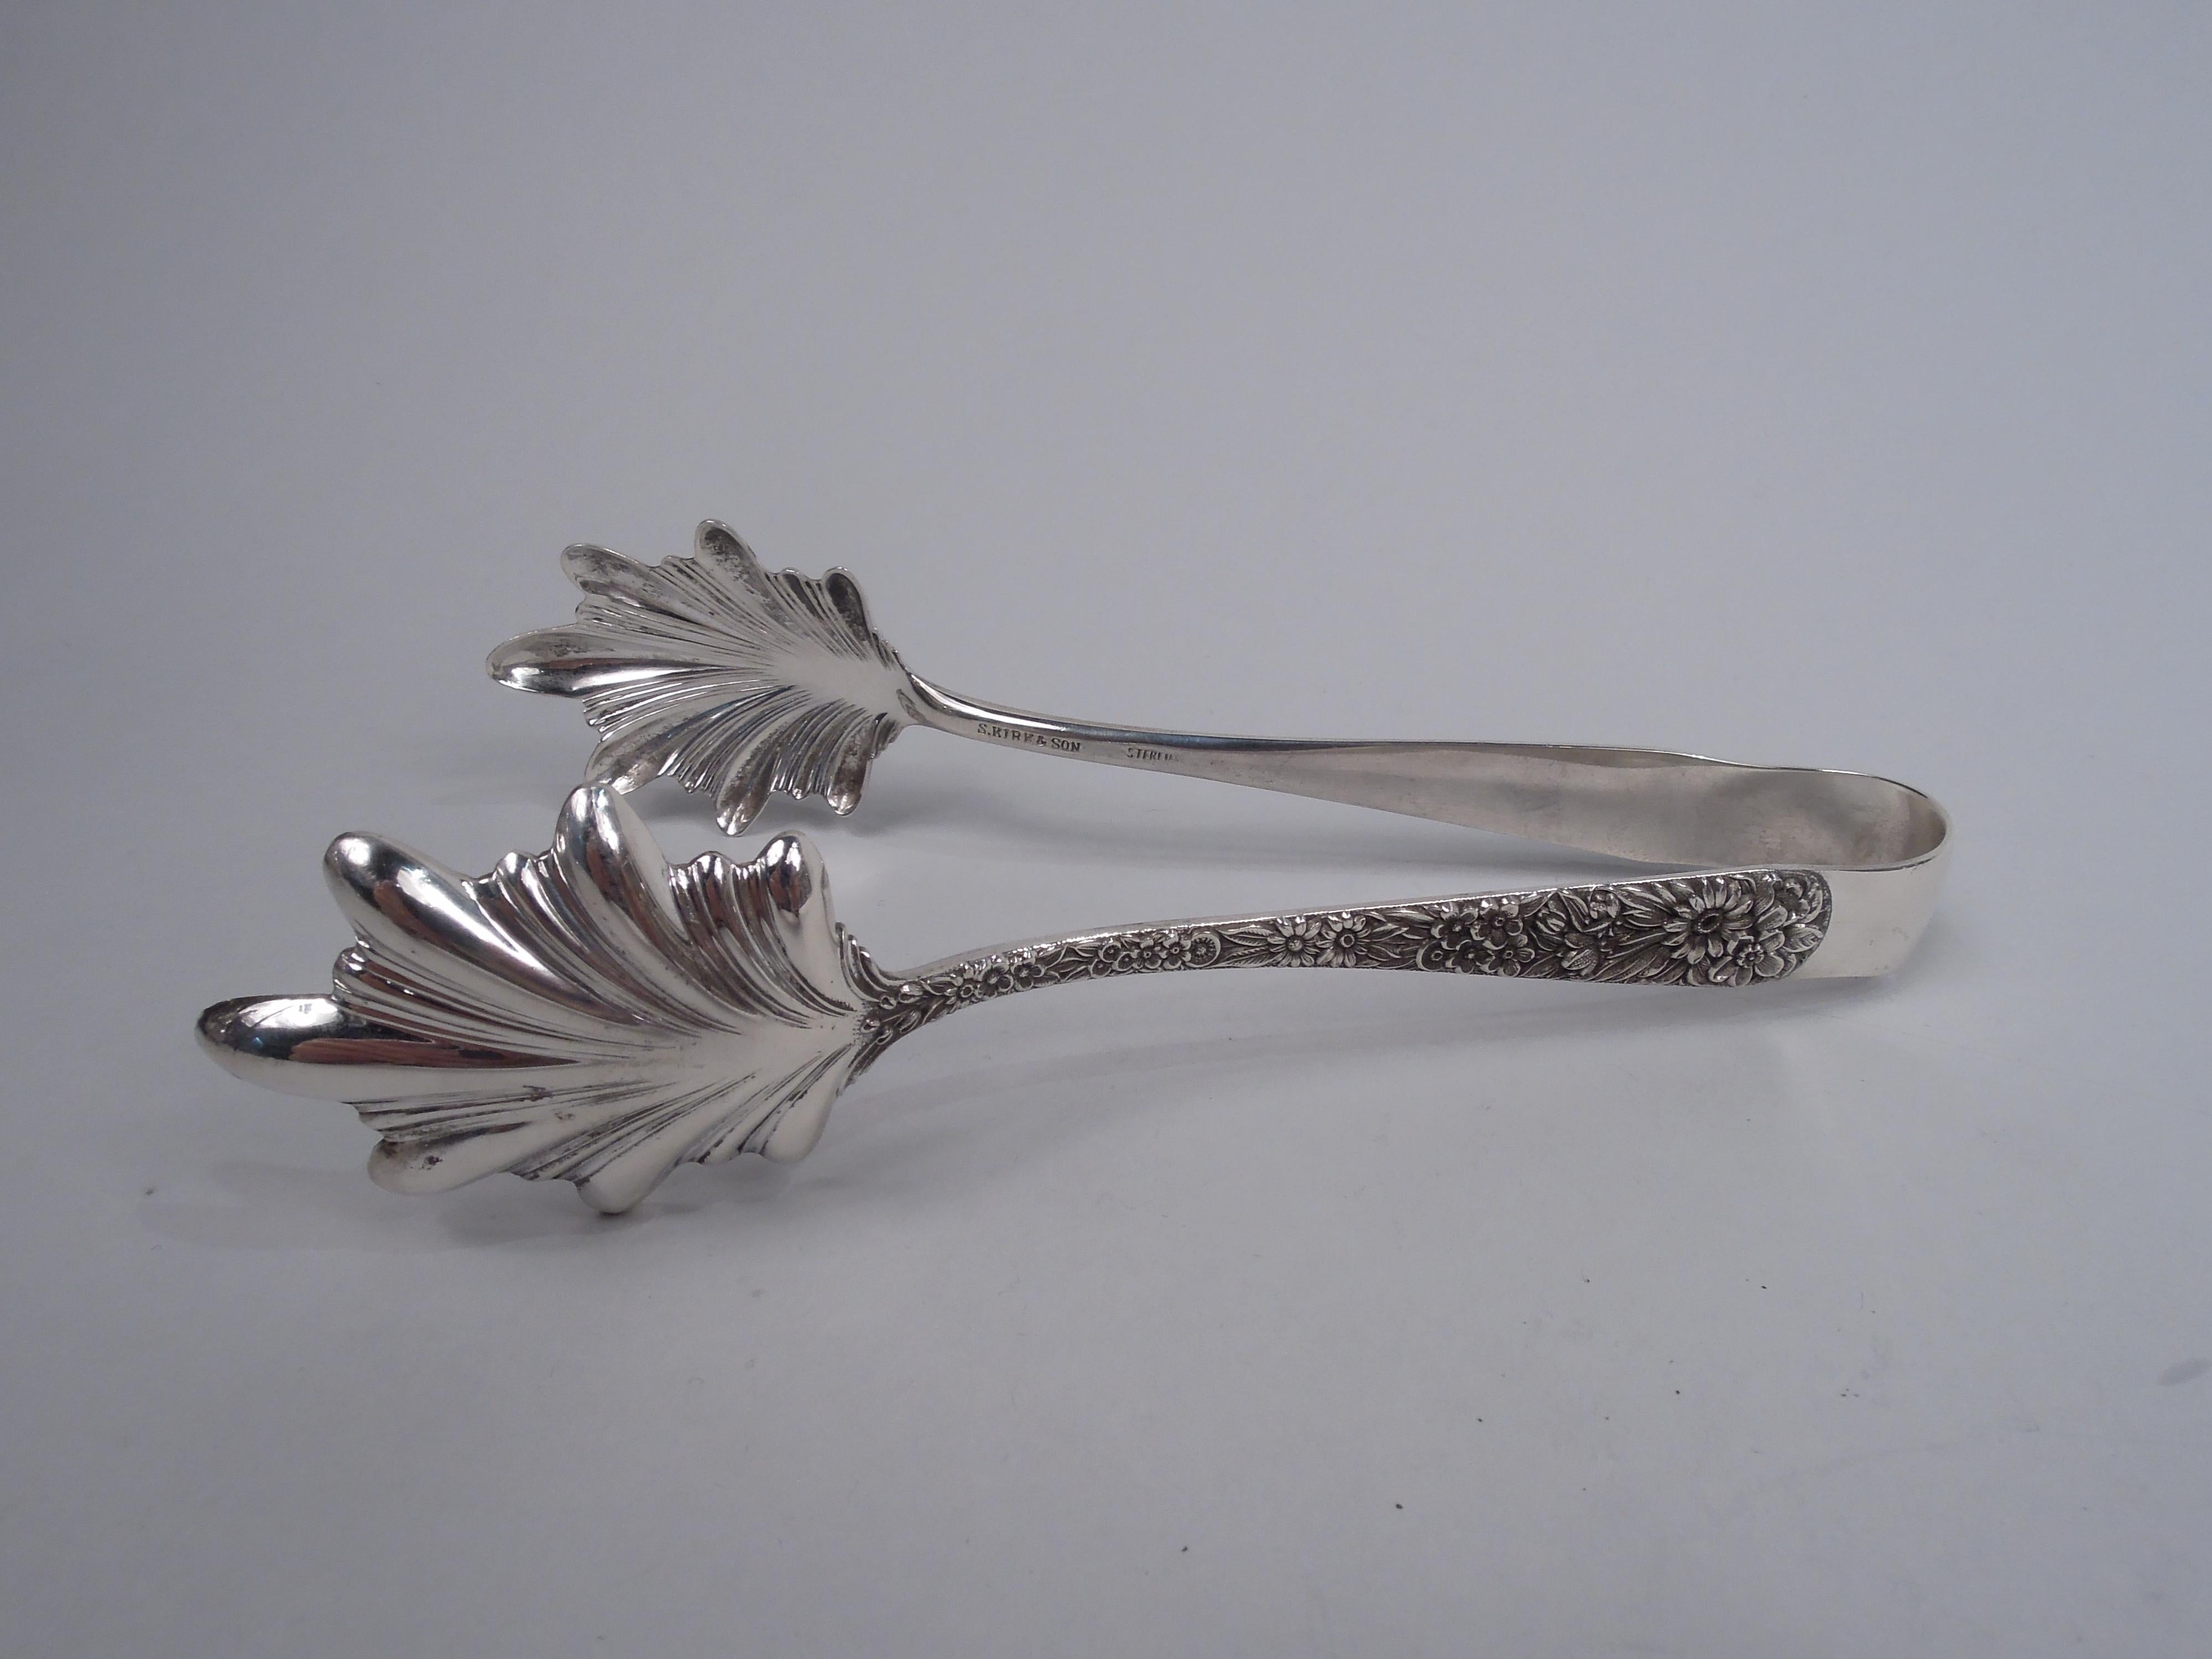 Pair of Repousse sterling silver ice tongs. Made by S. Kirk & Son in Baltimore. U-form applied with dense flowers and leaves in crisp relief; leaf jaws. Fully marked including maker’s stamp (1932-61). Weight: 2 troy ounces. 